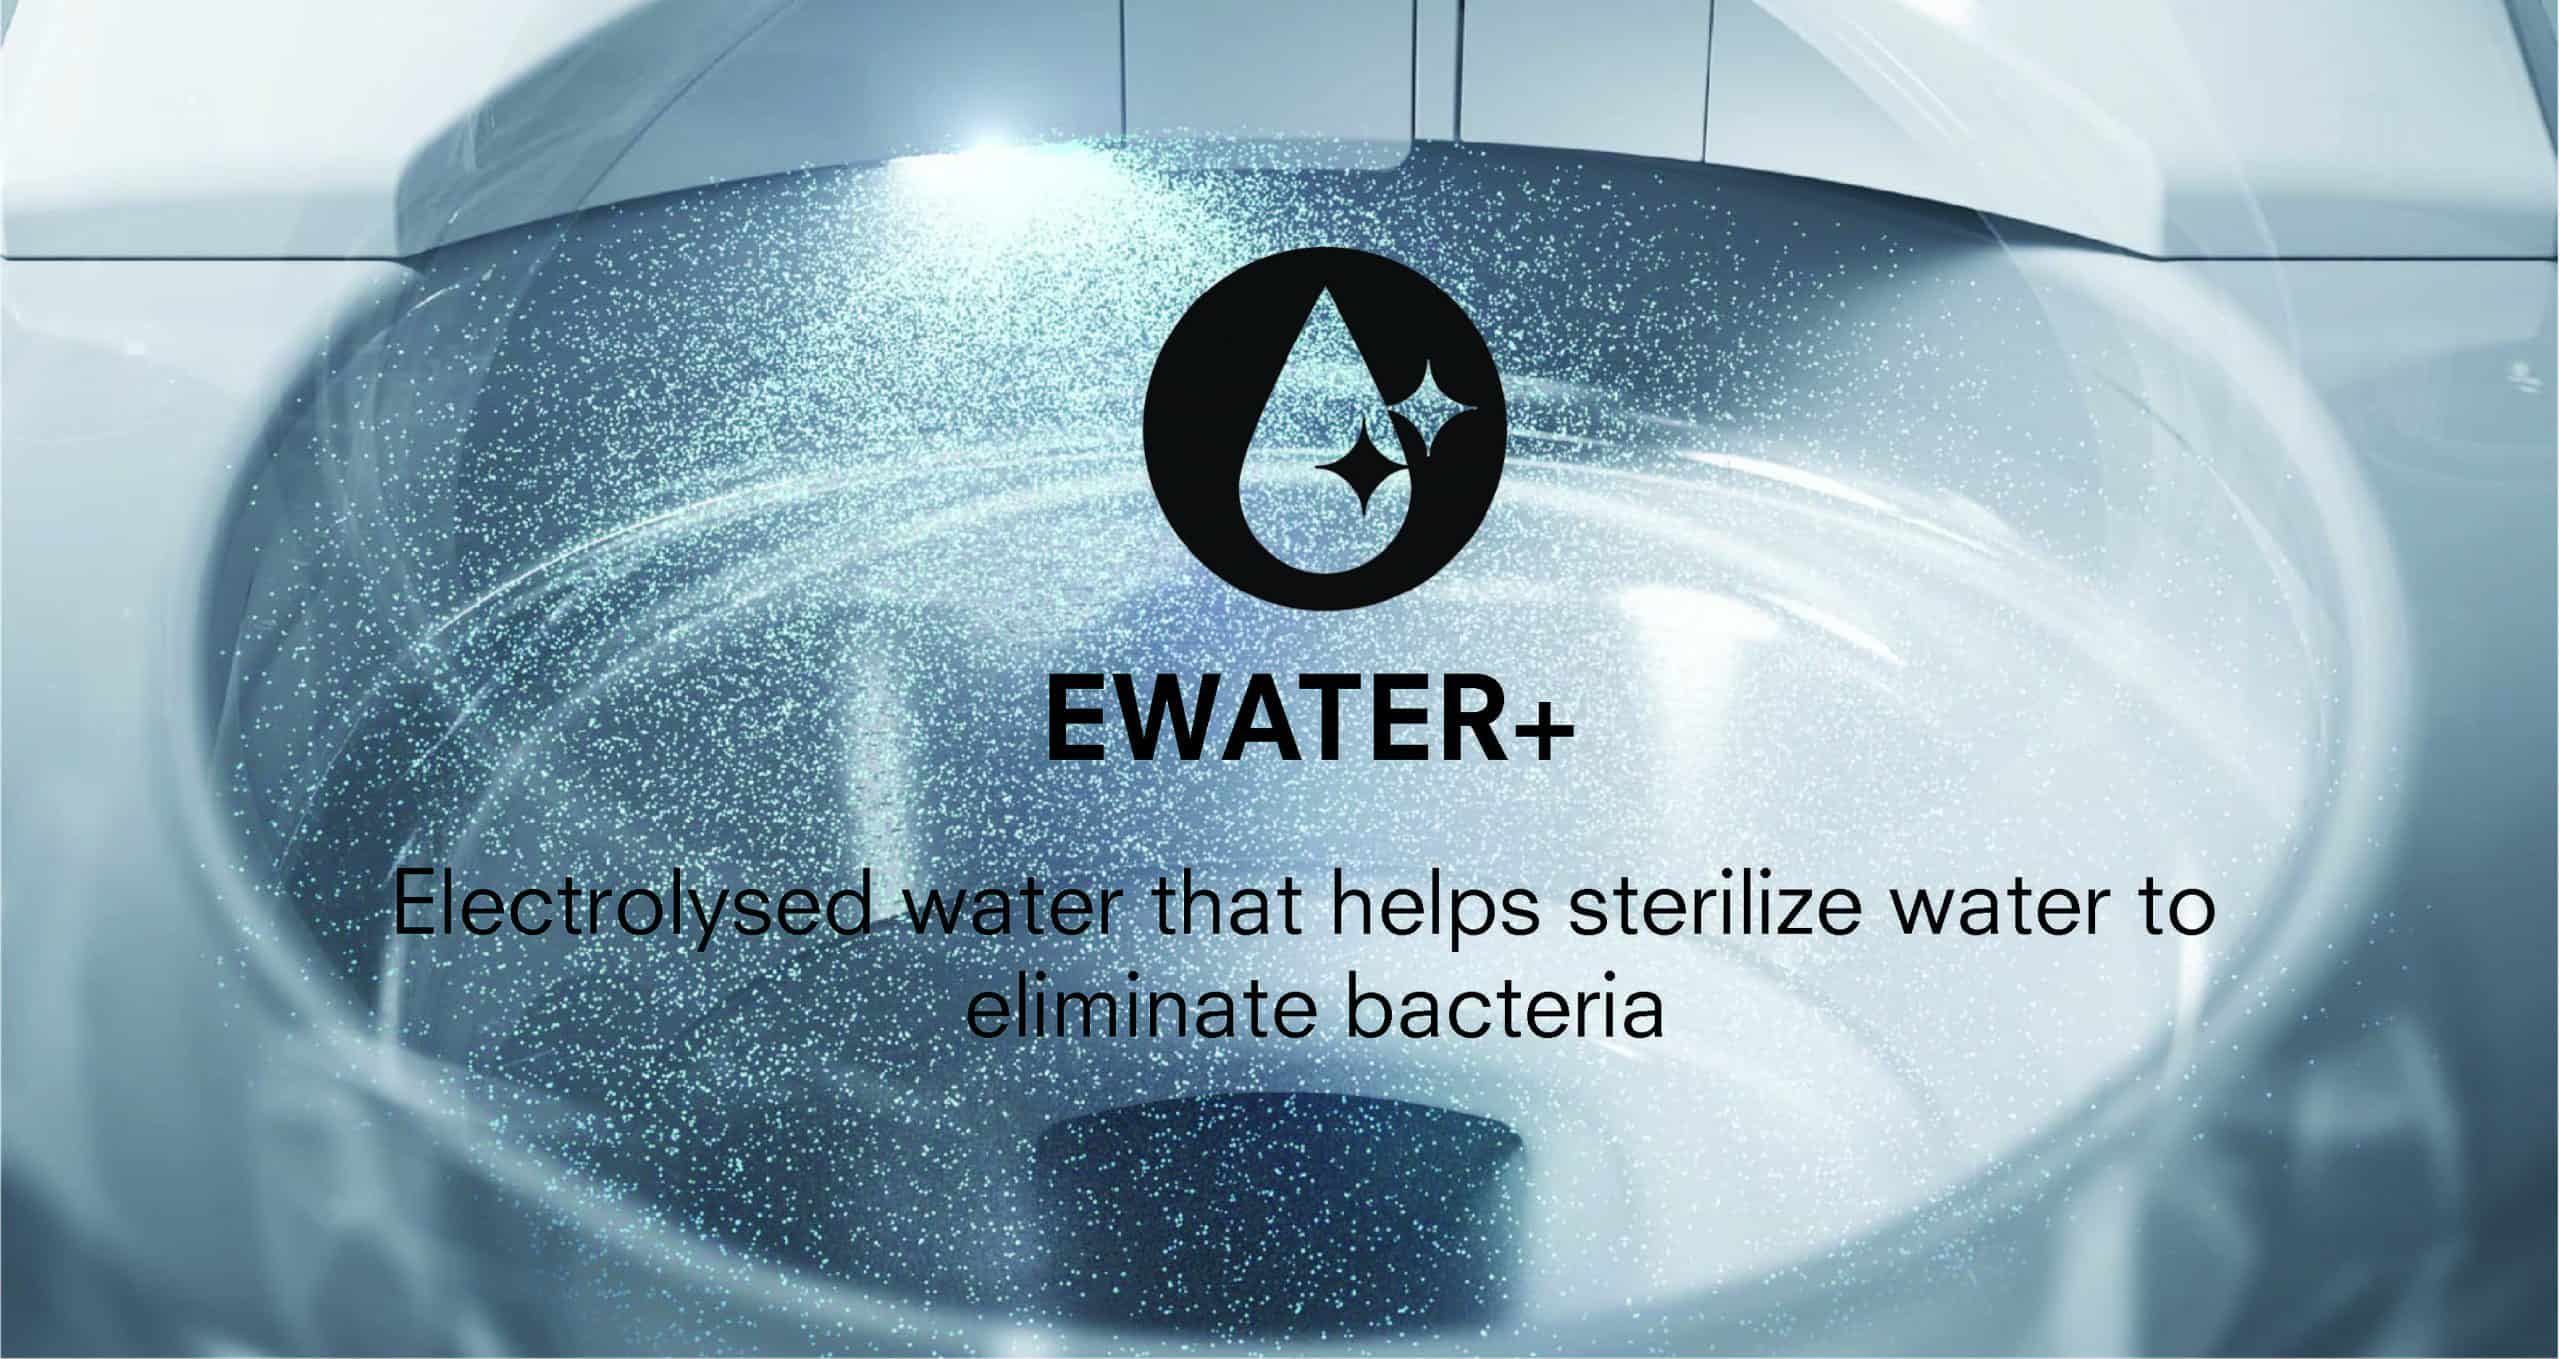 toto ewater explained